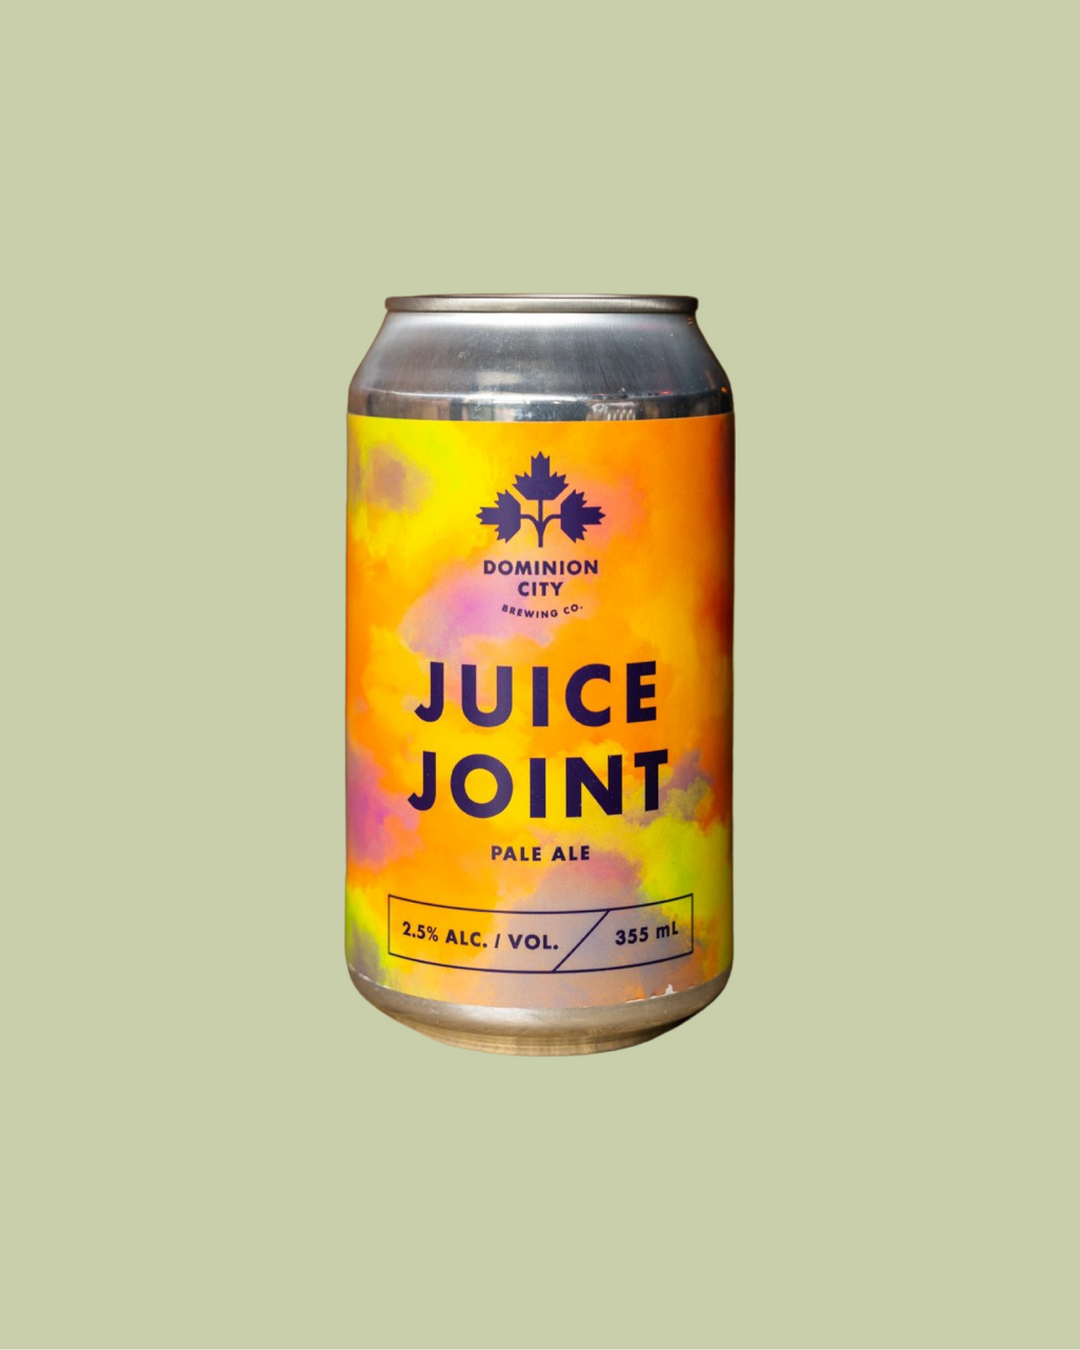 Juice Joint